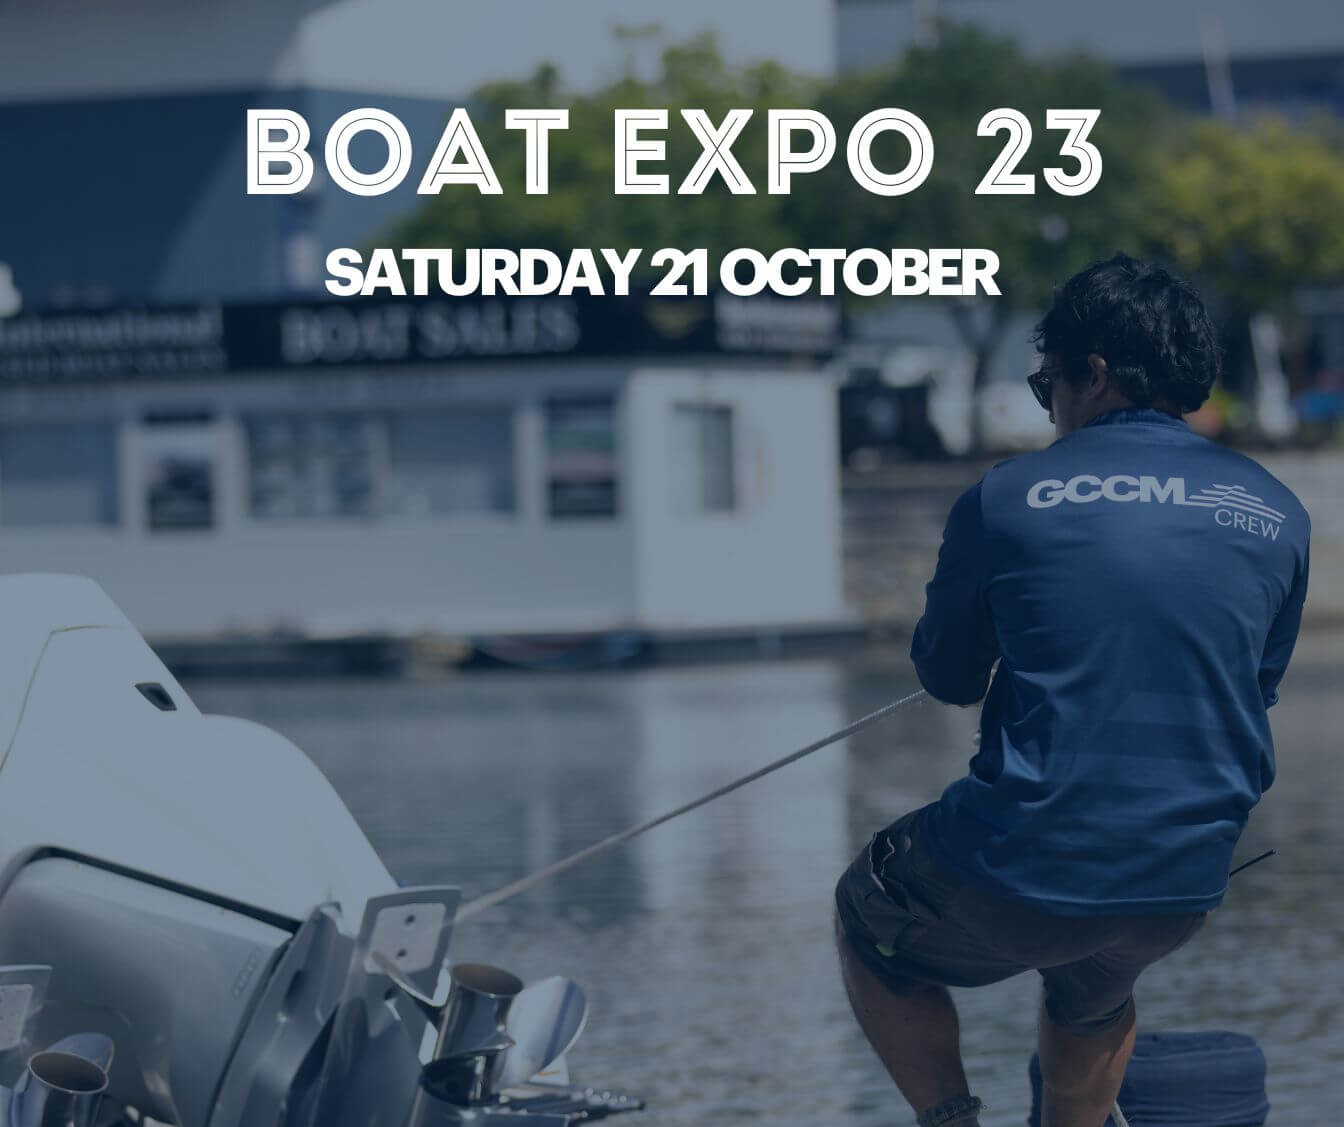 GCCM Boat Expo on Saturday 21 October